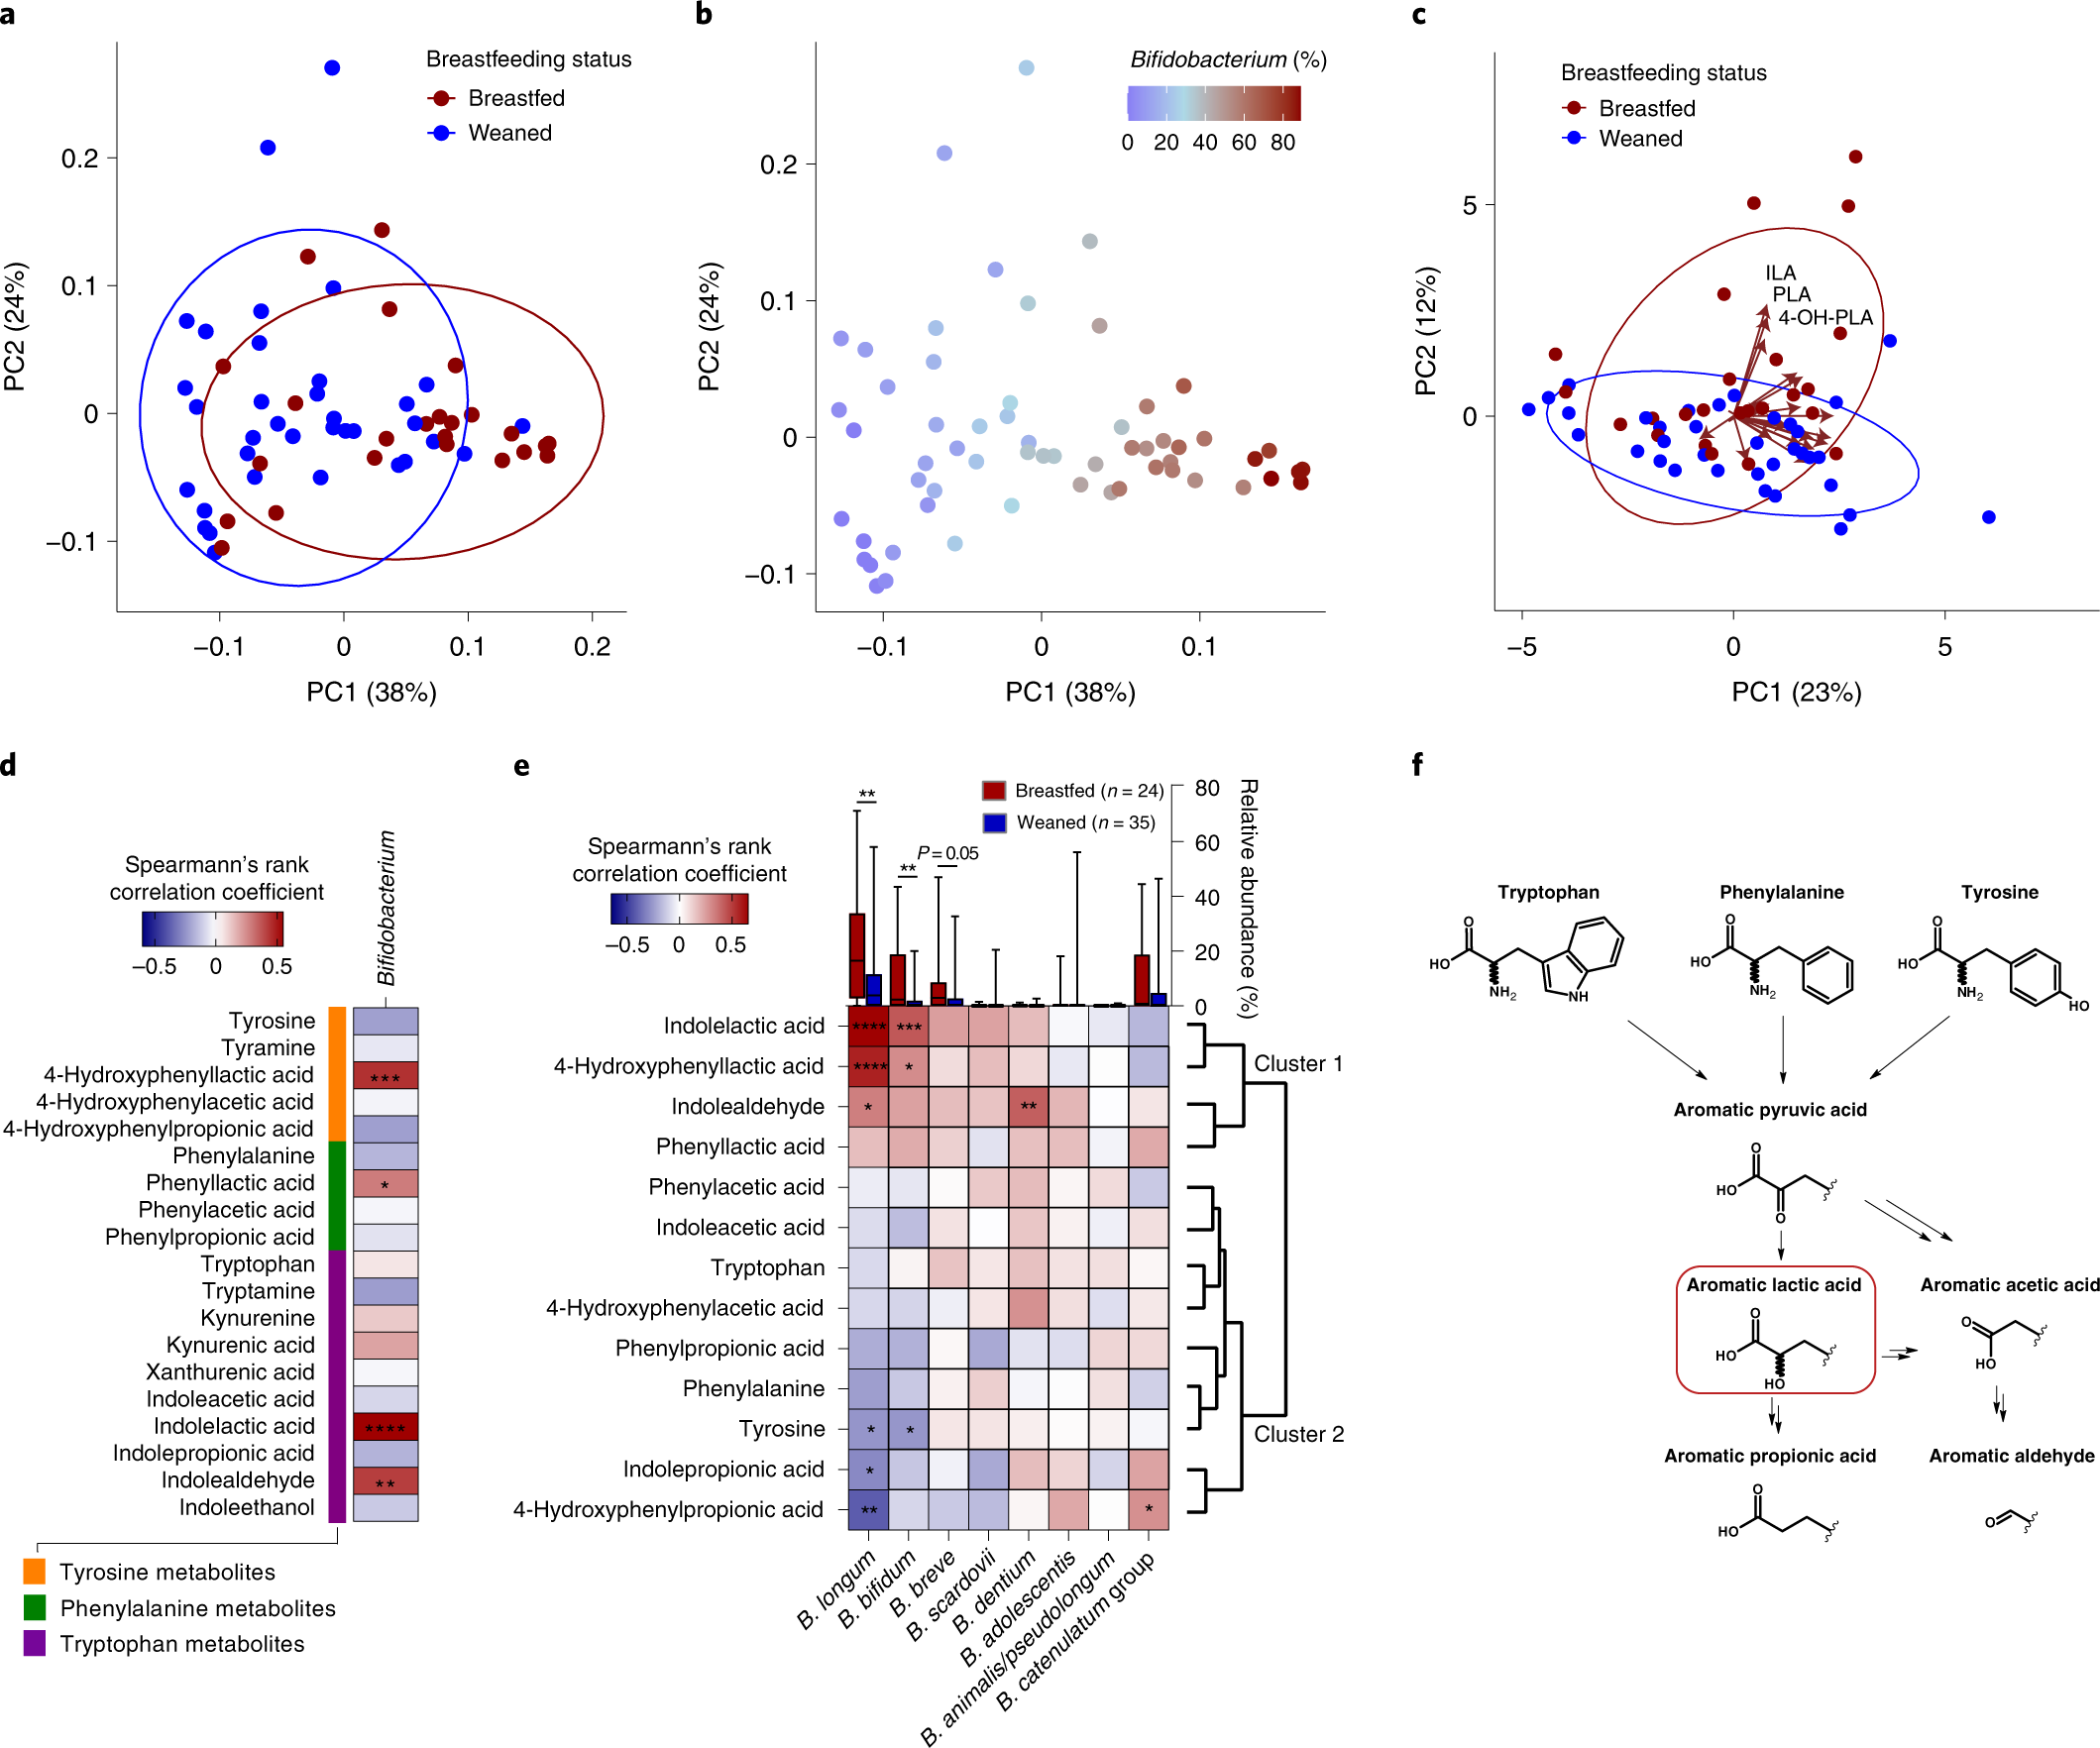 Bifidobacterium species associated with breastfeeding produce aromatic  lactic acids in the infant gut | Nature Microbiology